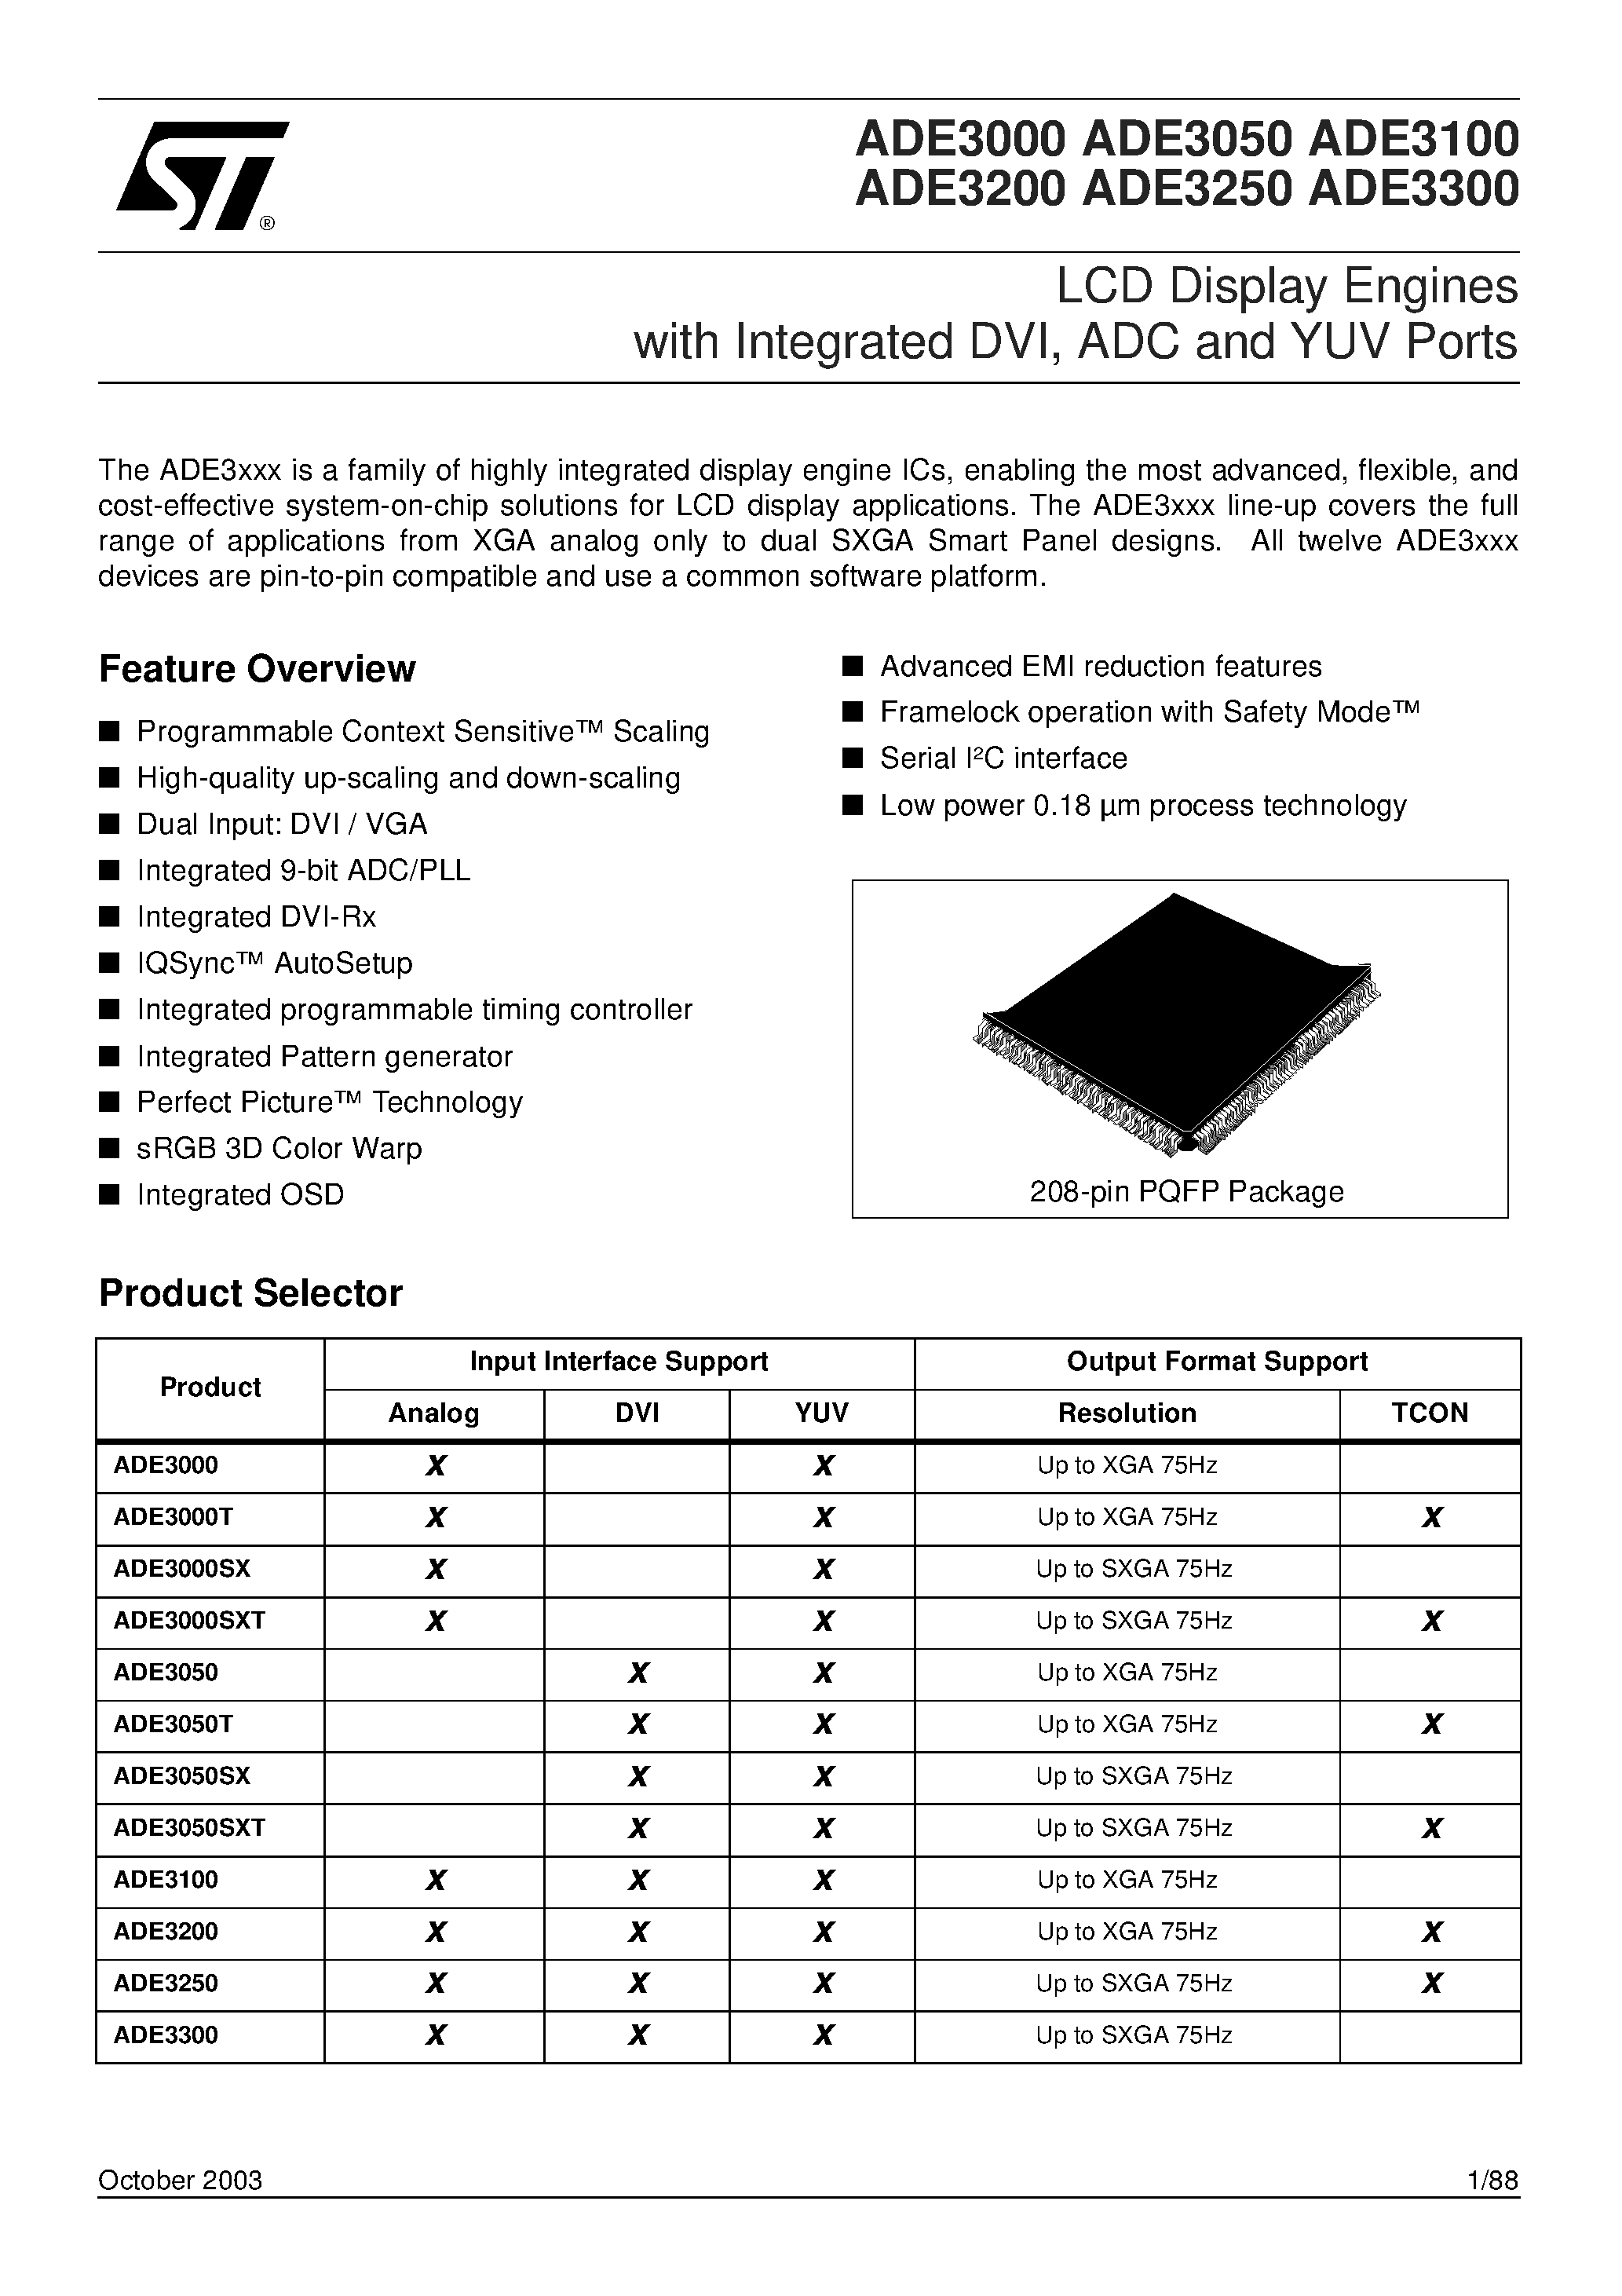 Datasheet ADE3000SXT - LCD Display Engines with Integrated DVI/ ADC and YUV Ports page 1